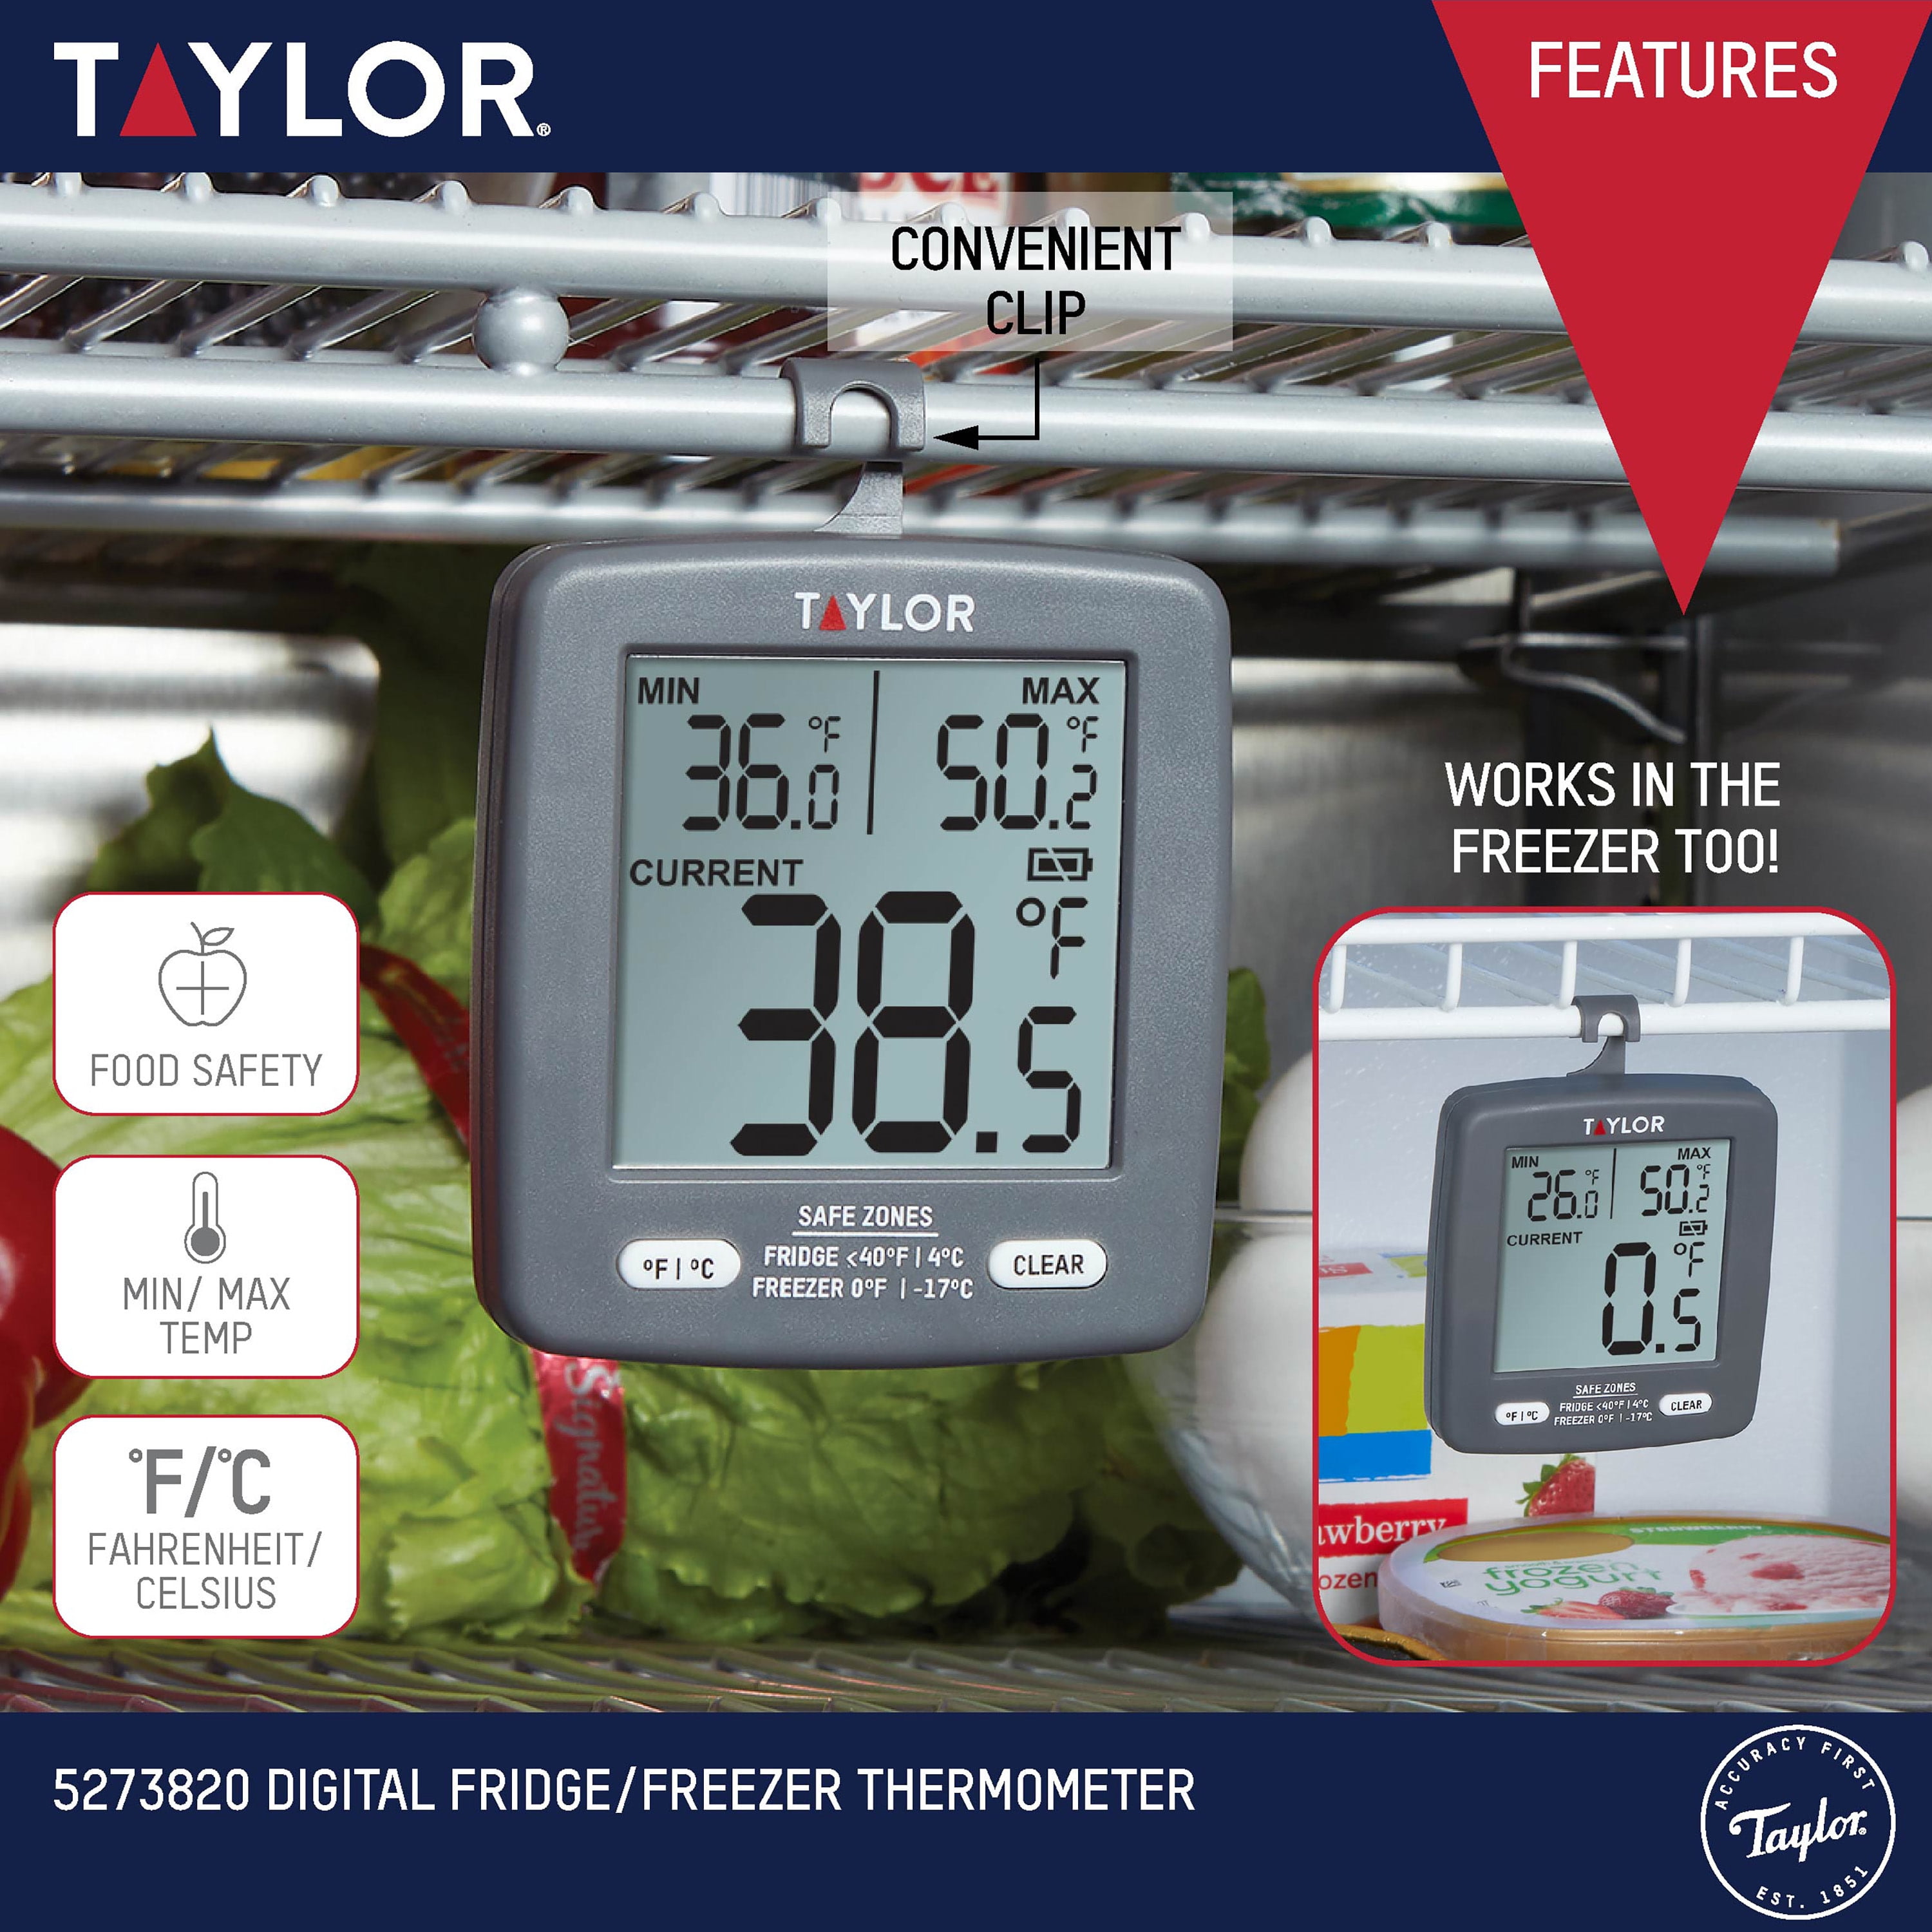 Taylor 5924 Refrigerator & Freezer Thermometer for Commercial Restaurant  Coolers